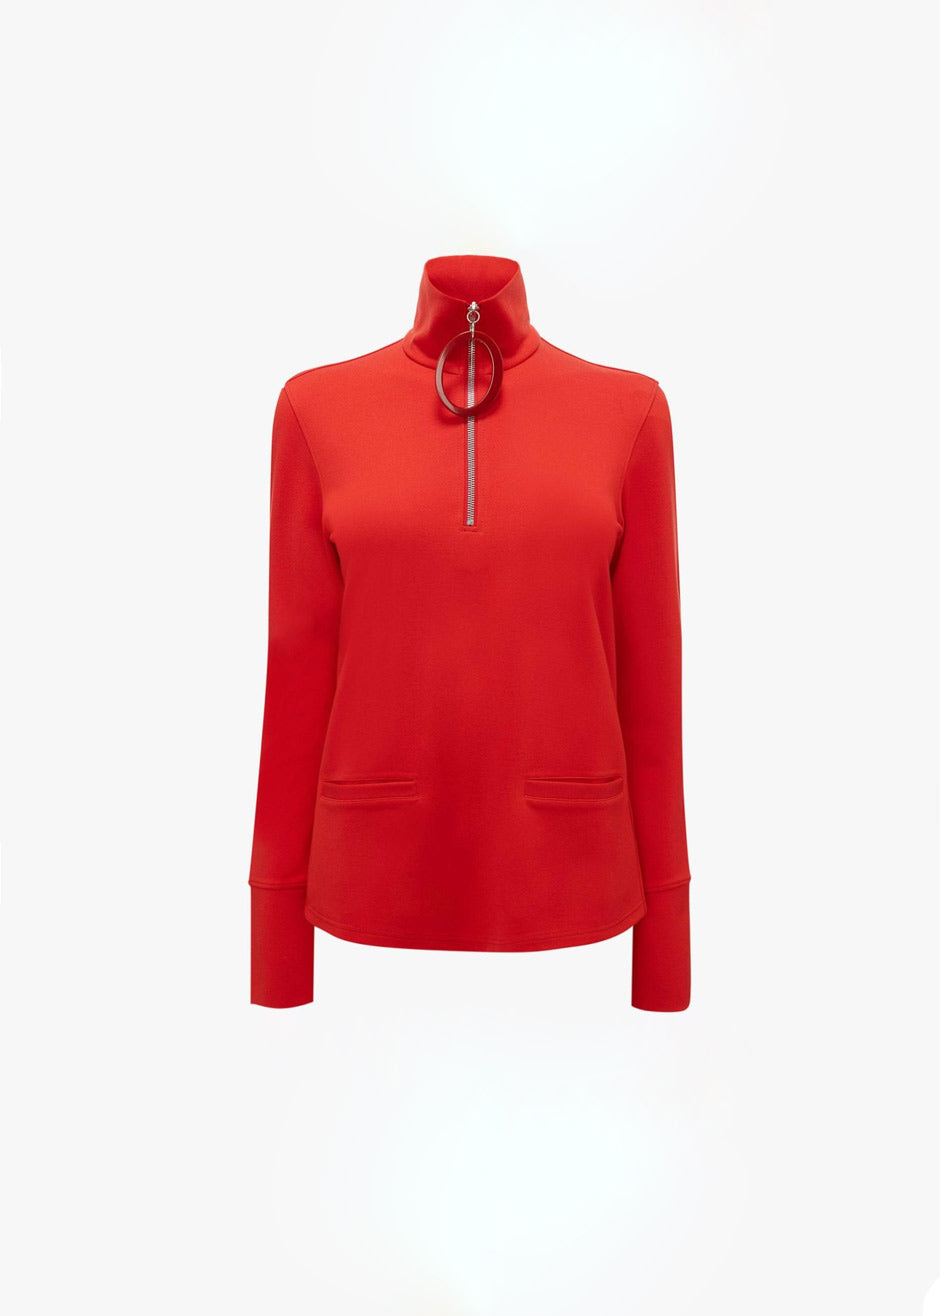 JW Anderson Ring Puller Half Zip Track Top - Red - 10